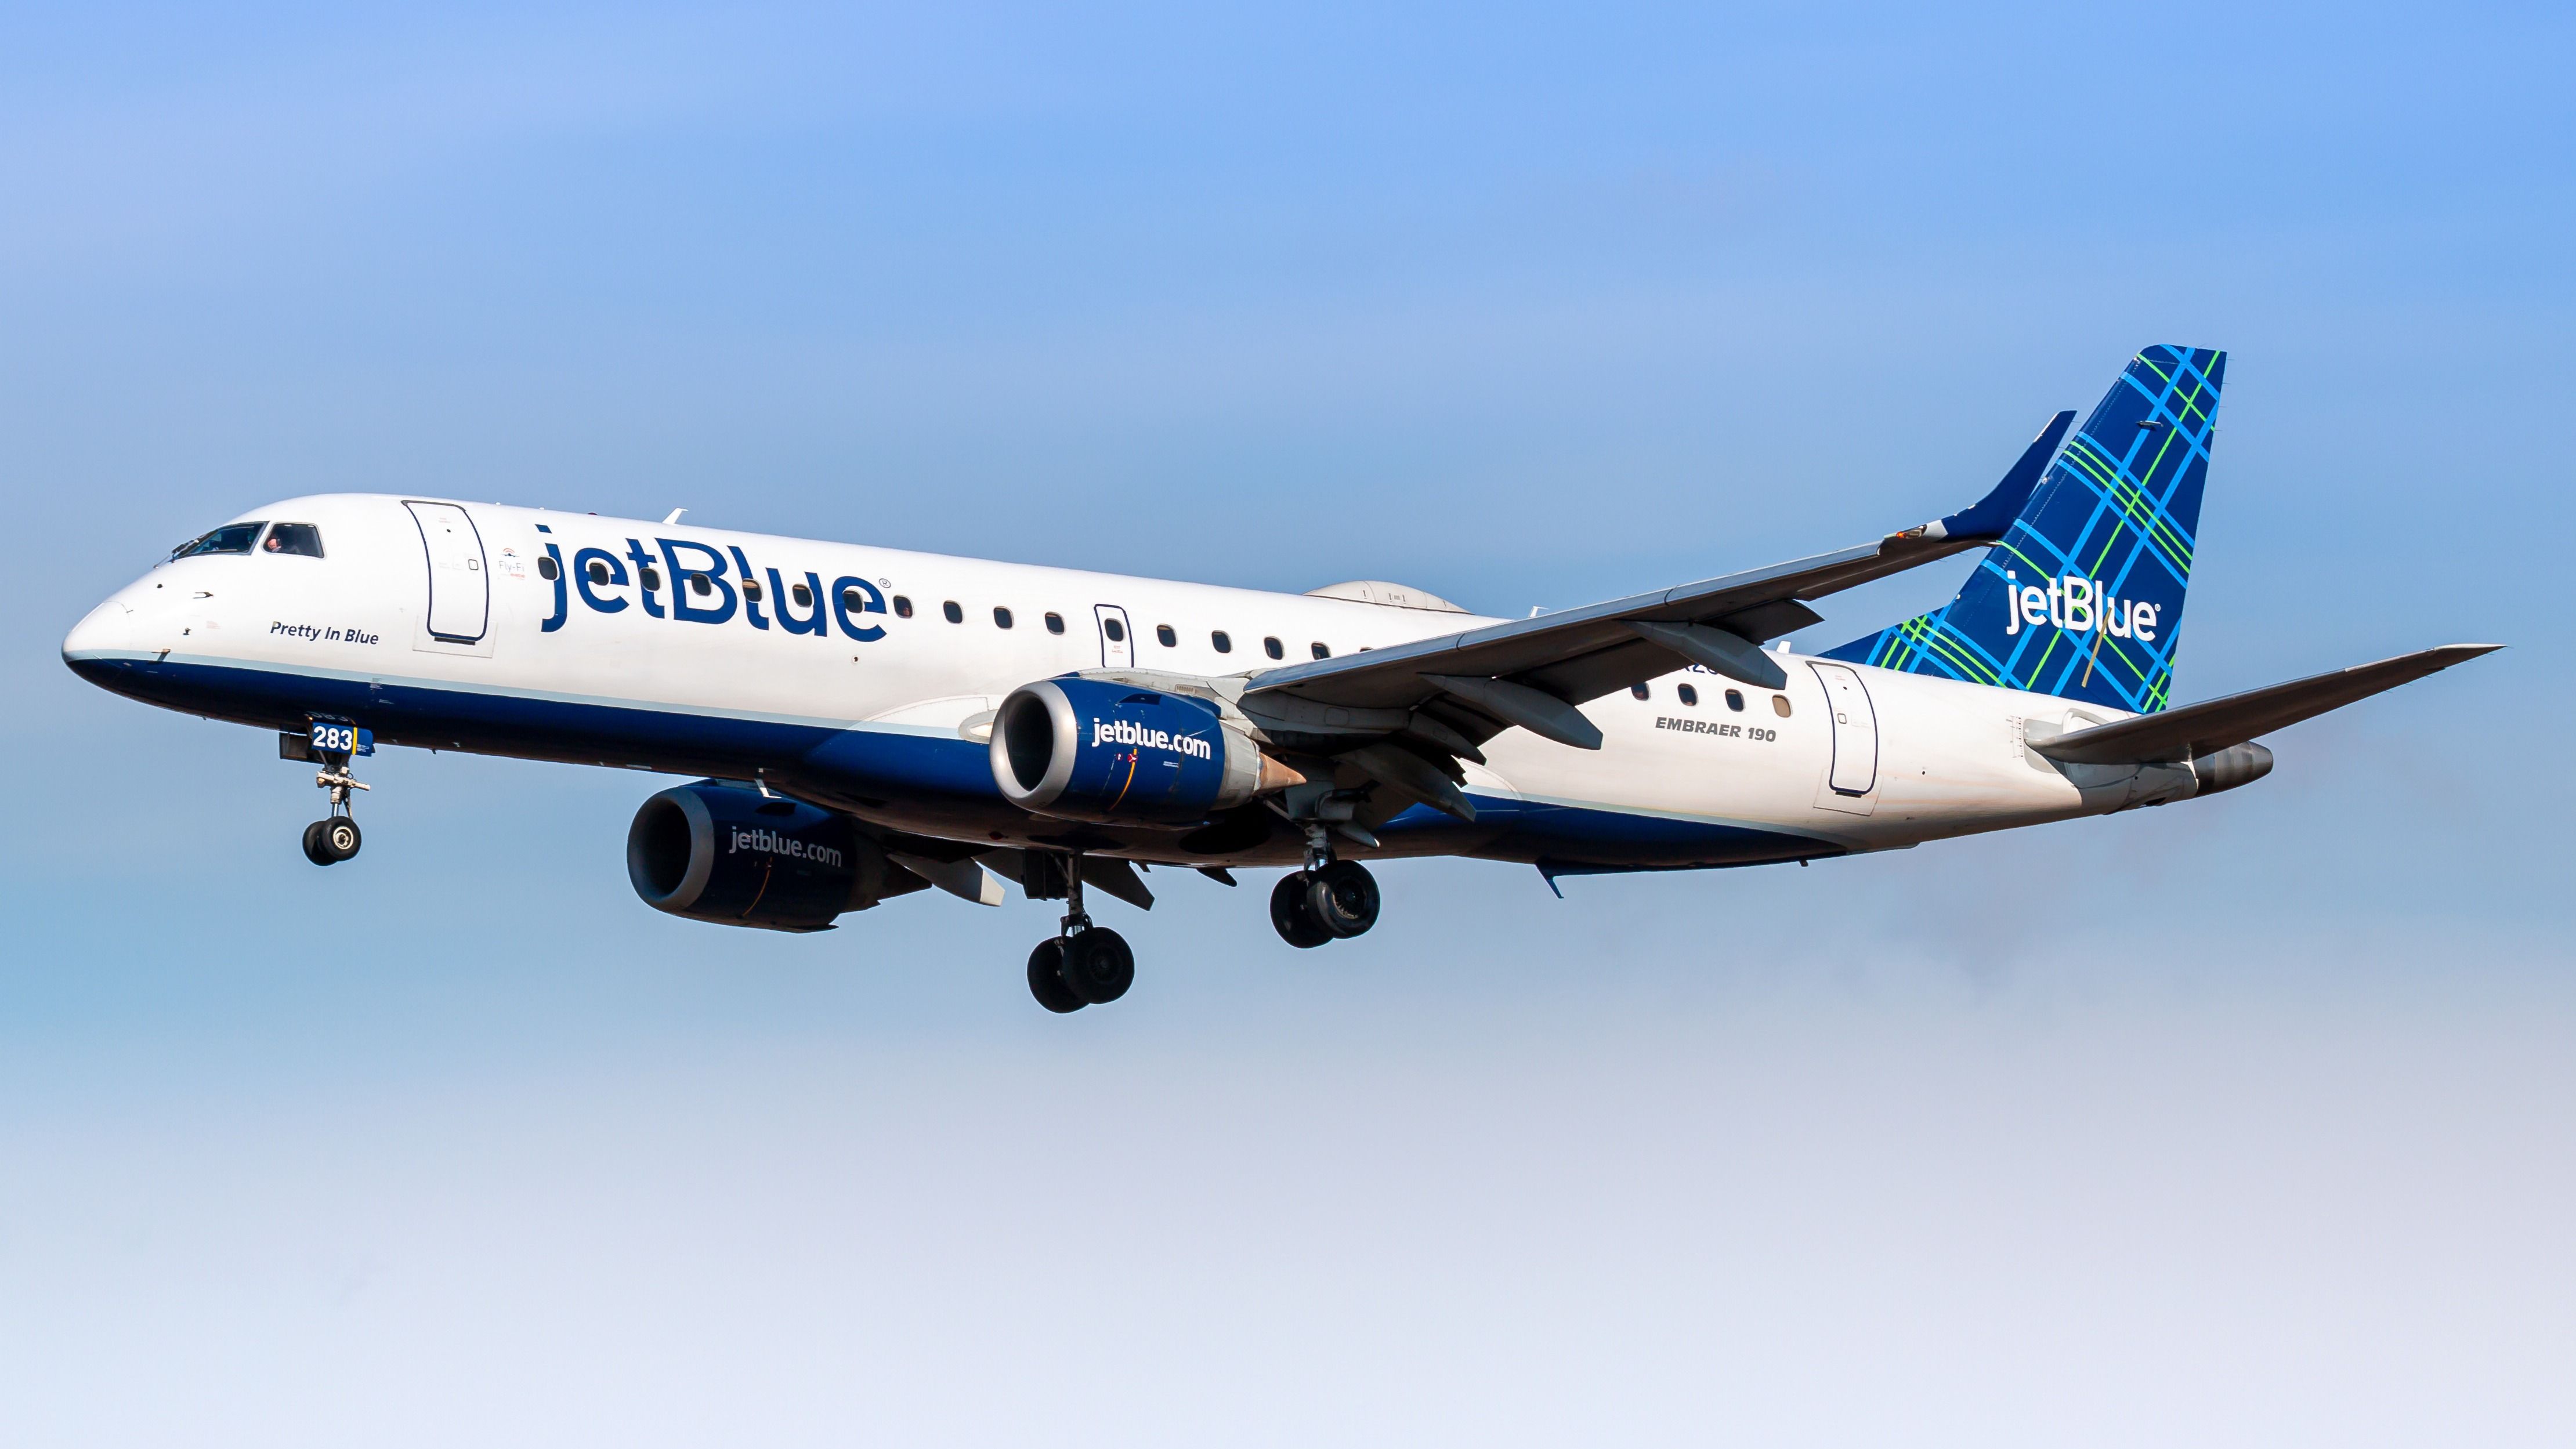 A JetBlue Embraer 190 flying in the sky.